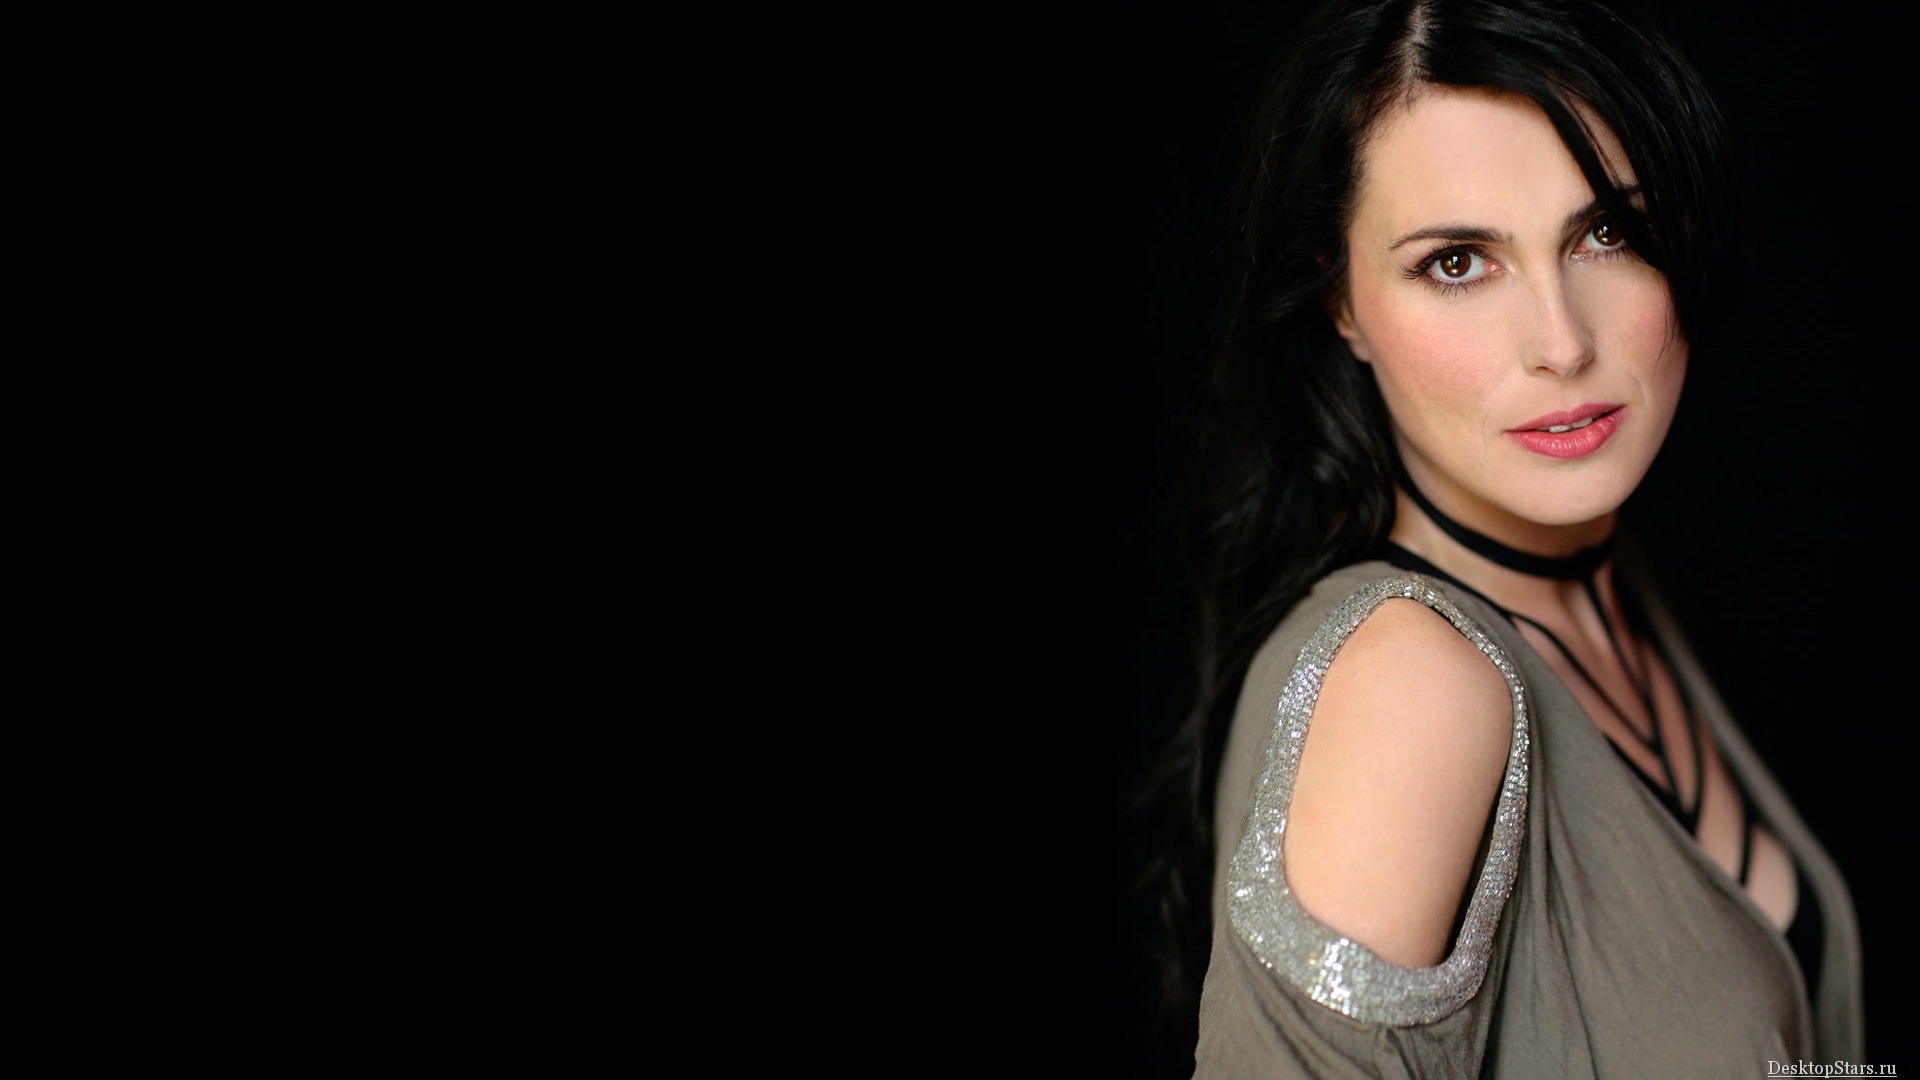 Sharon den Adel #004 - 1920x1080 Wallpapers Pictures Photos Images